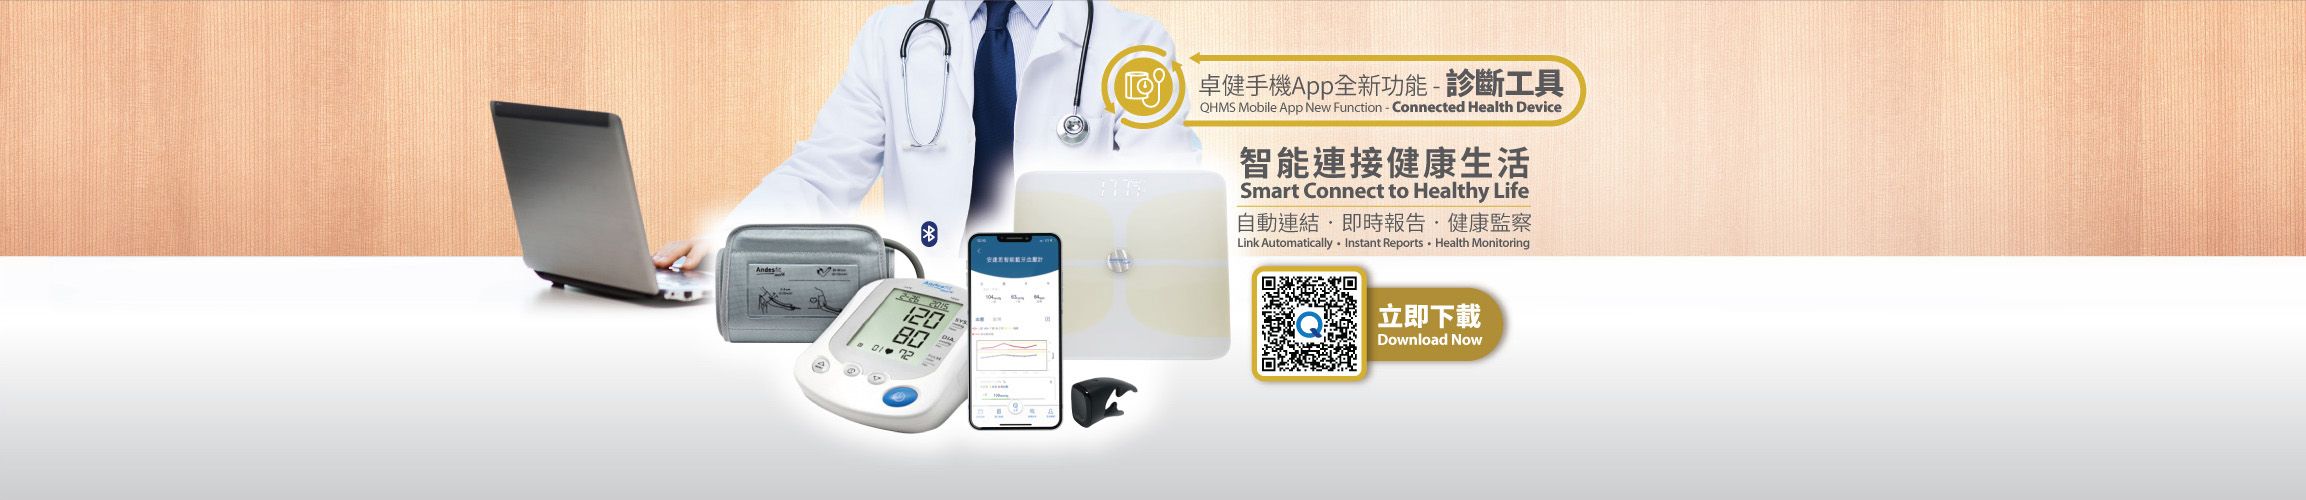 connected health device banner